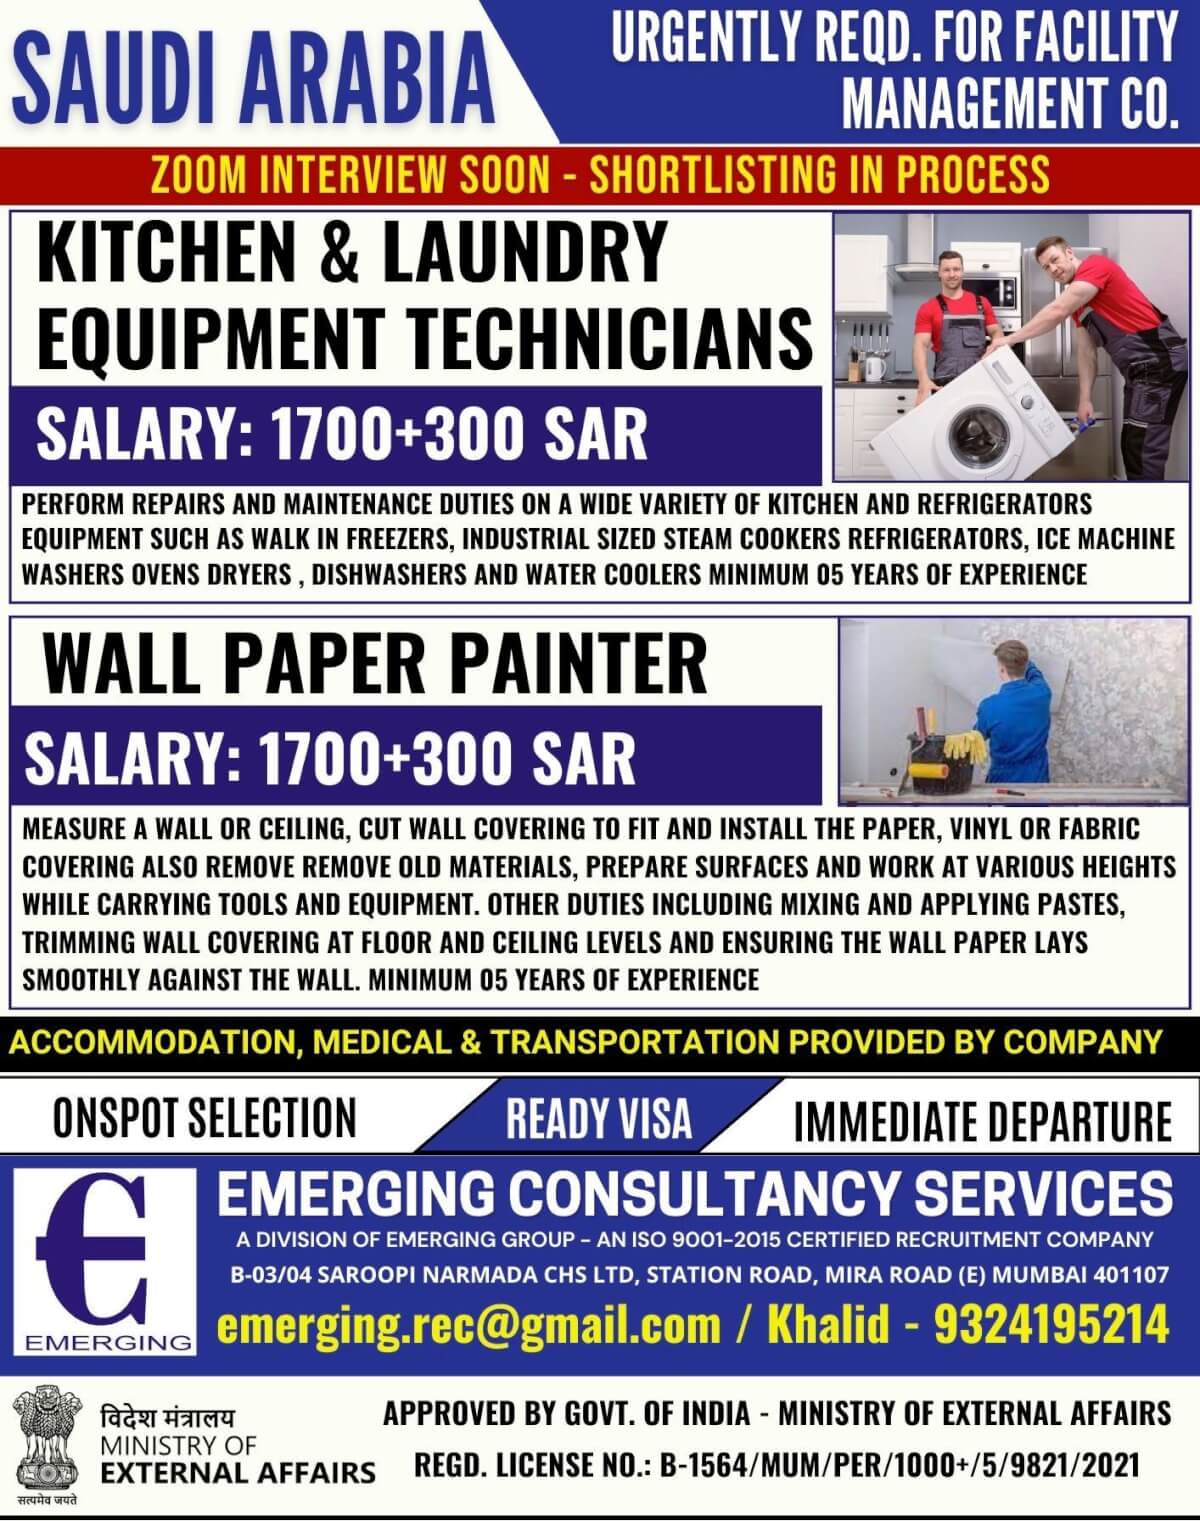 URGENTLY REQD. FOR FACILITY MANAGEMENT COMPANY IN SAUDI ARABIA